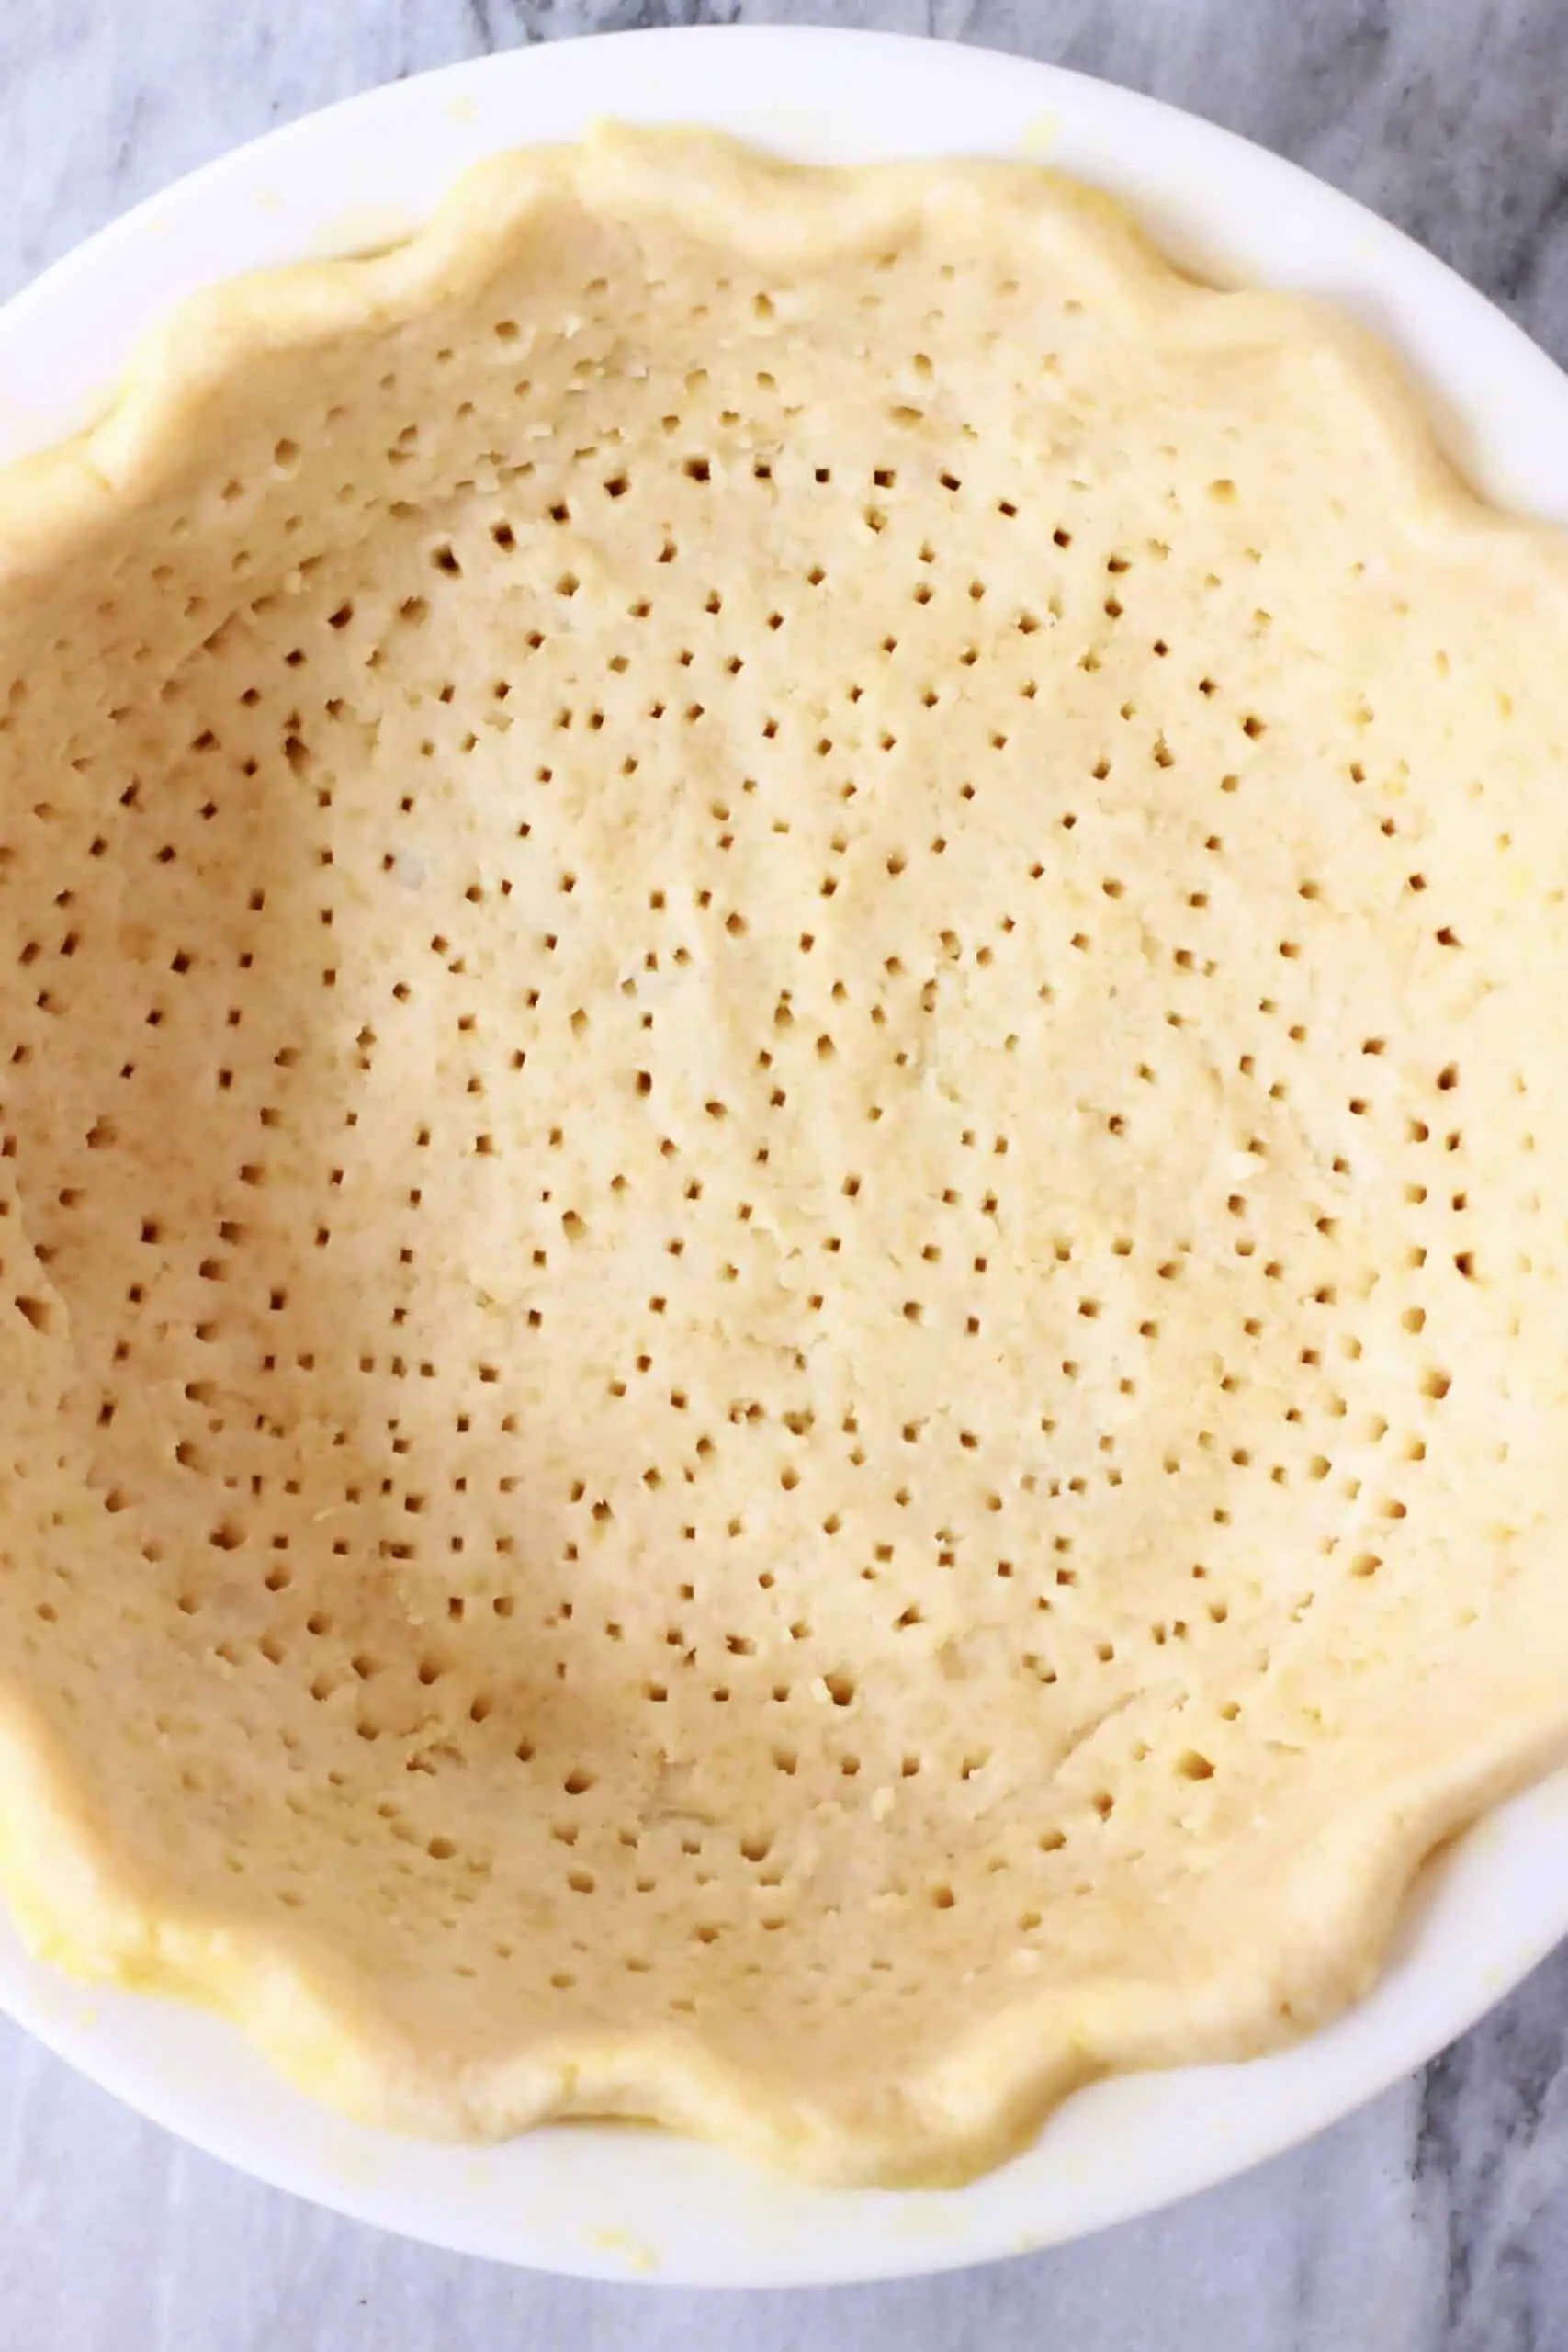 Photo of a pie crust with lots of holes poked in the surface in a white pie dish against a marble background